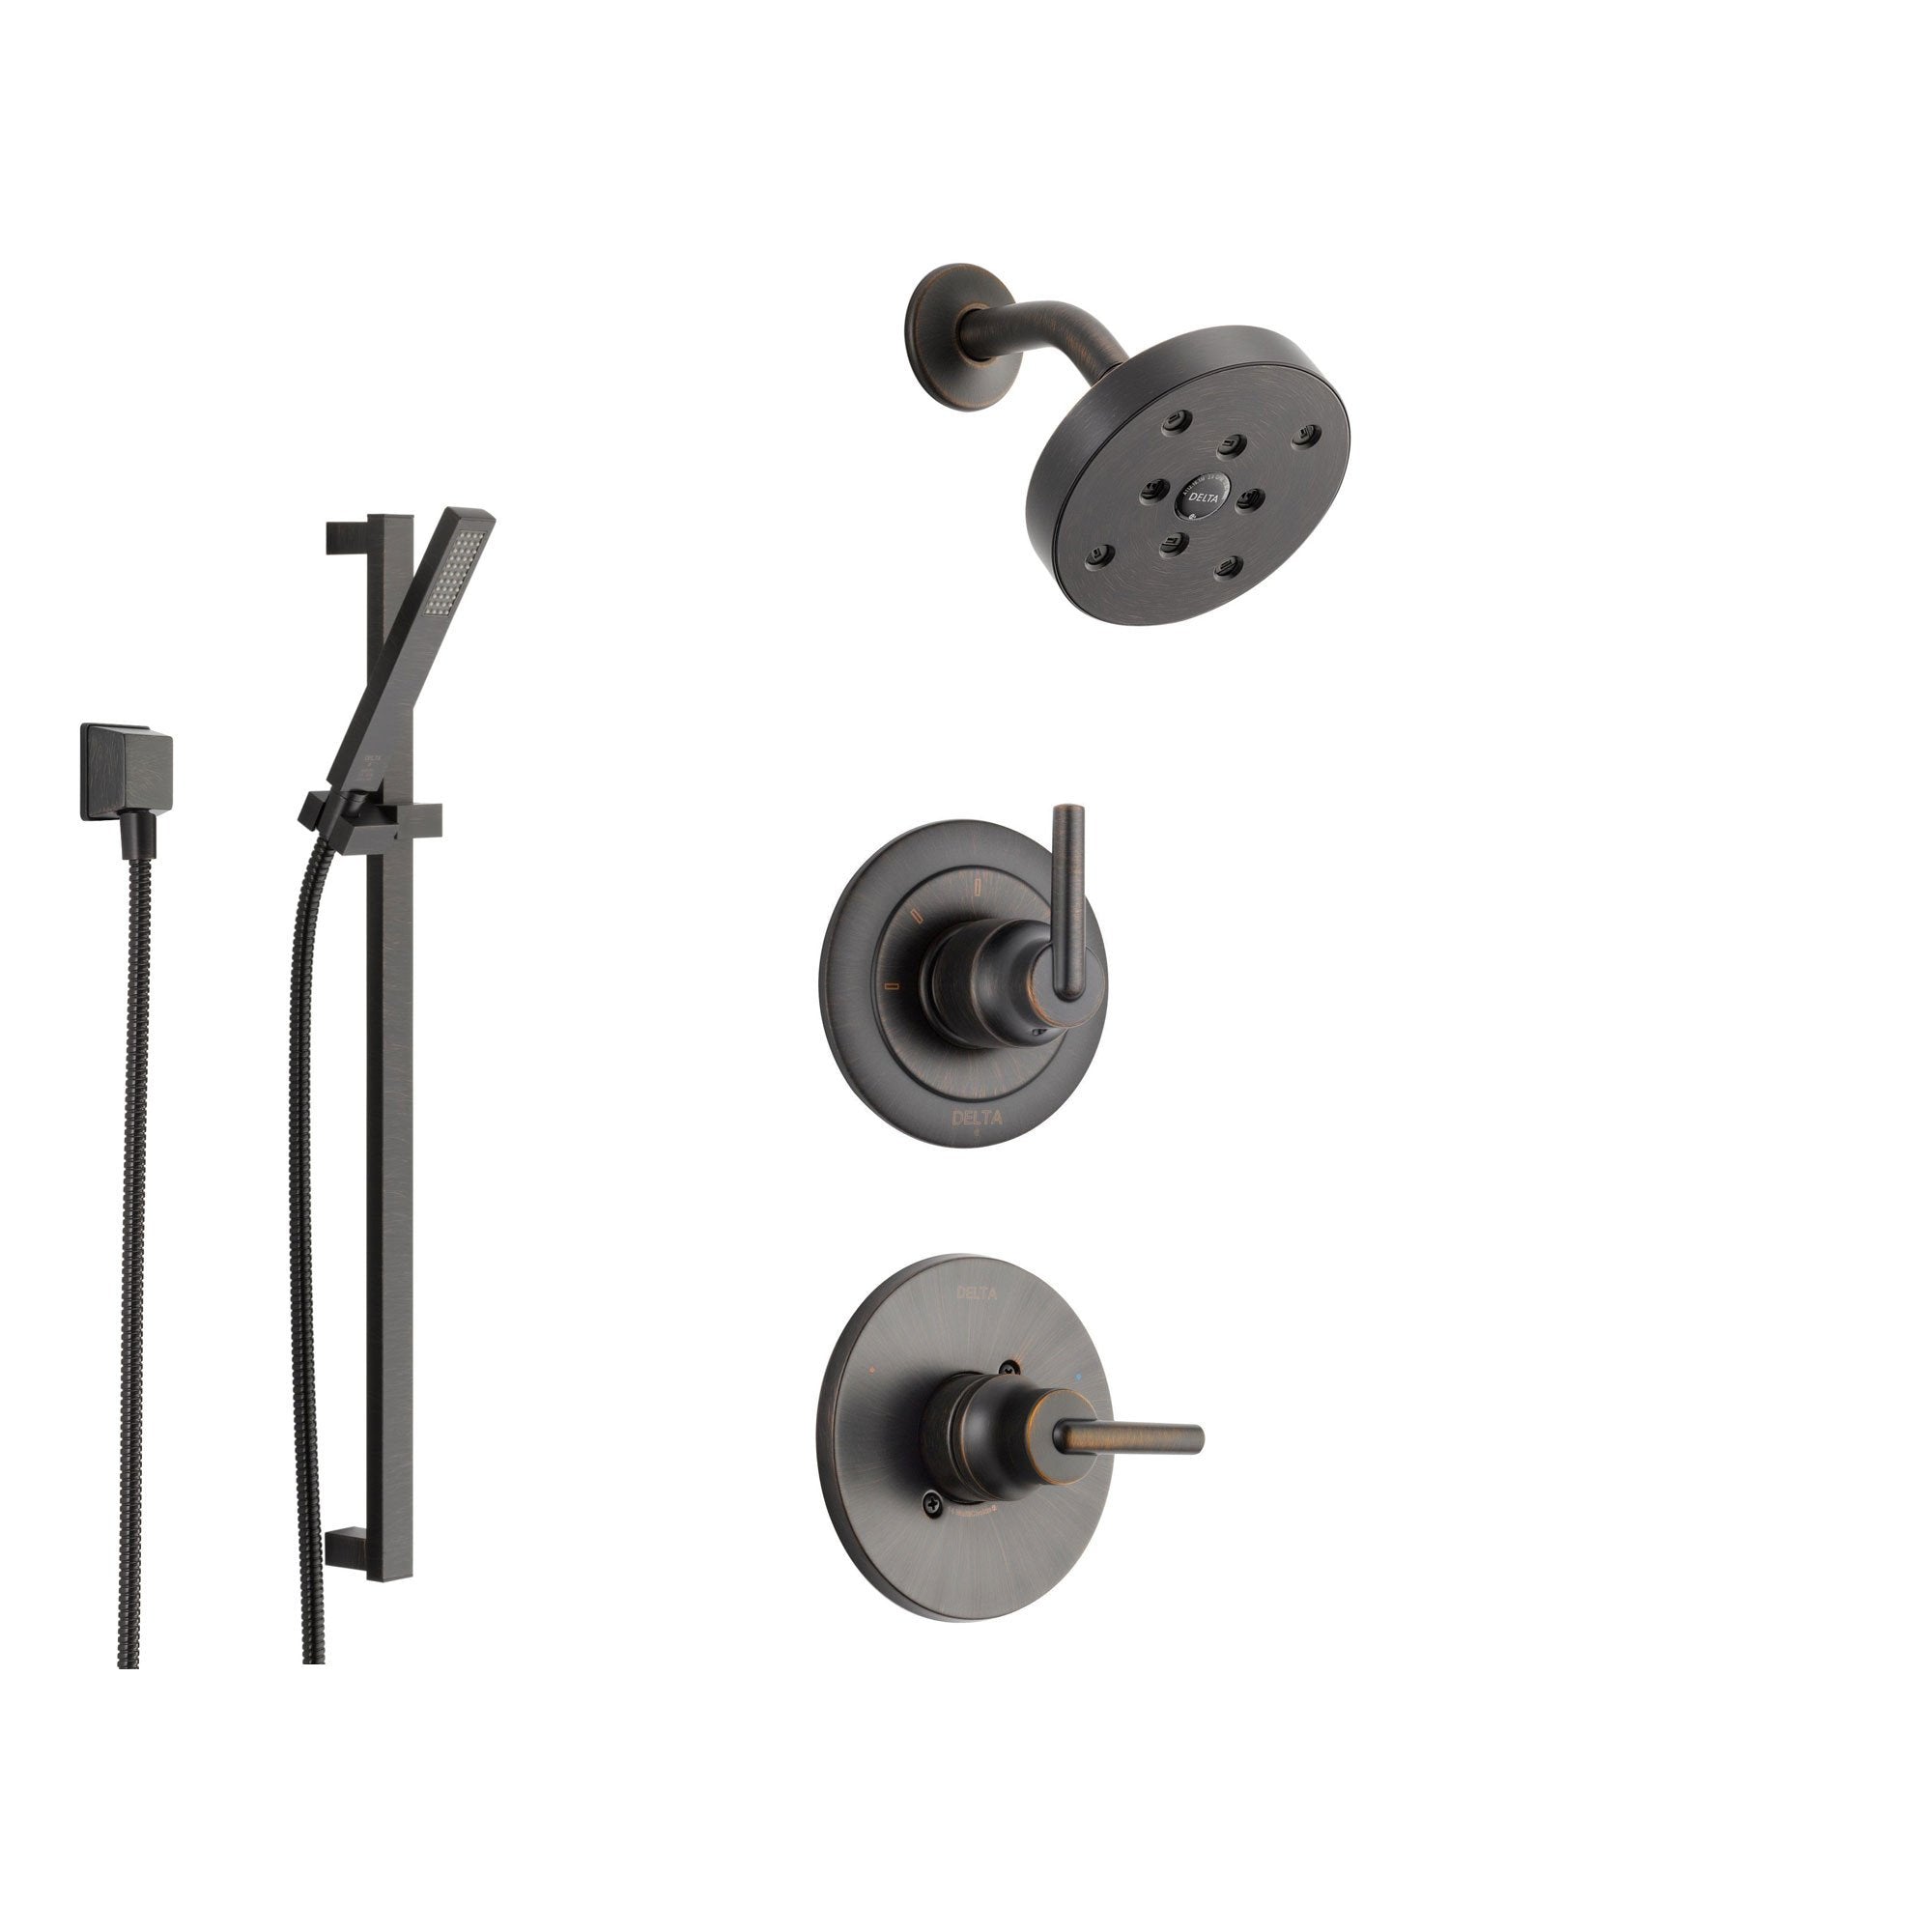 Delta Trinsic Venetian Bronze Shower System with Normal Shower Handle, 3-setting Diverter, Modern Round Showerhead, and Handheld Shower SS145981RB